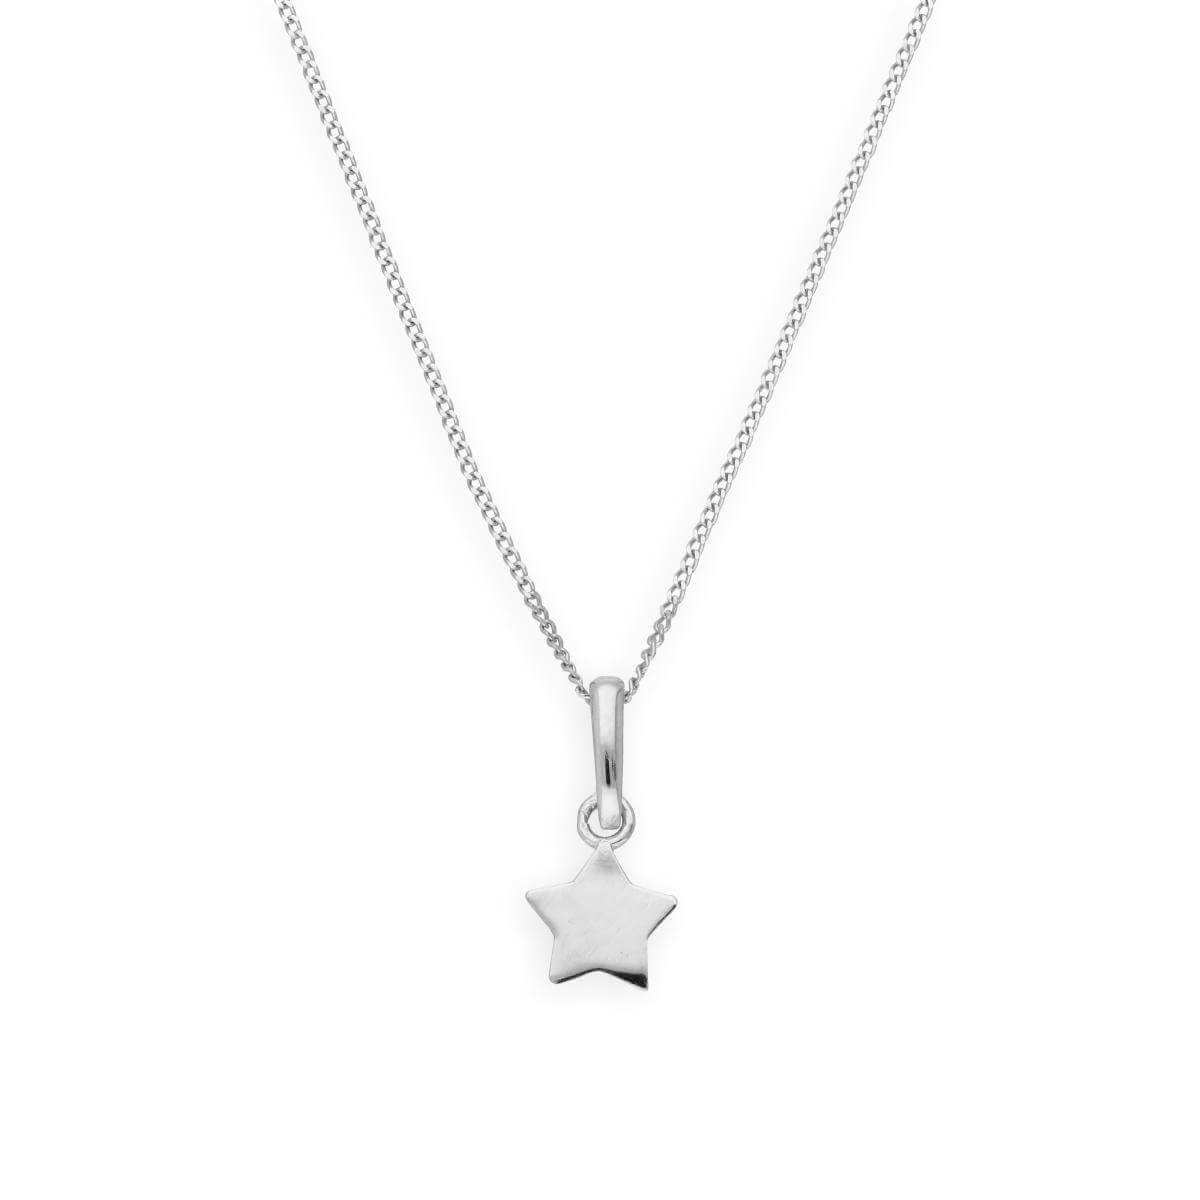 9ct White Gold Star Pendant Necklace 16 - 20 Inches - jewellerybox